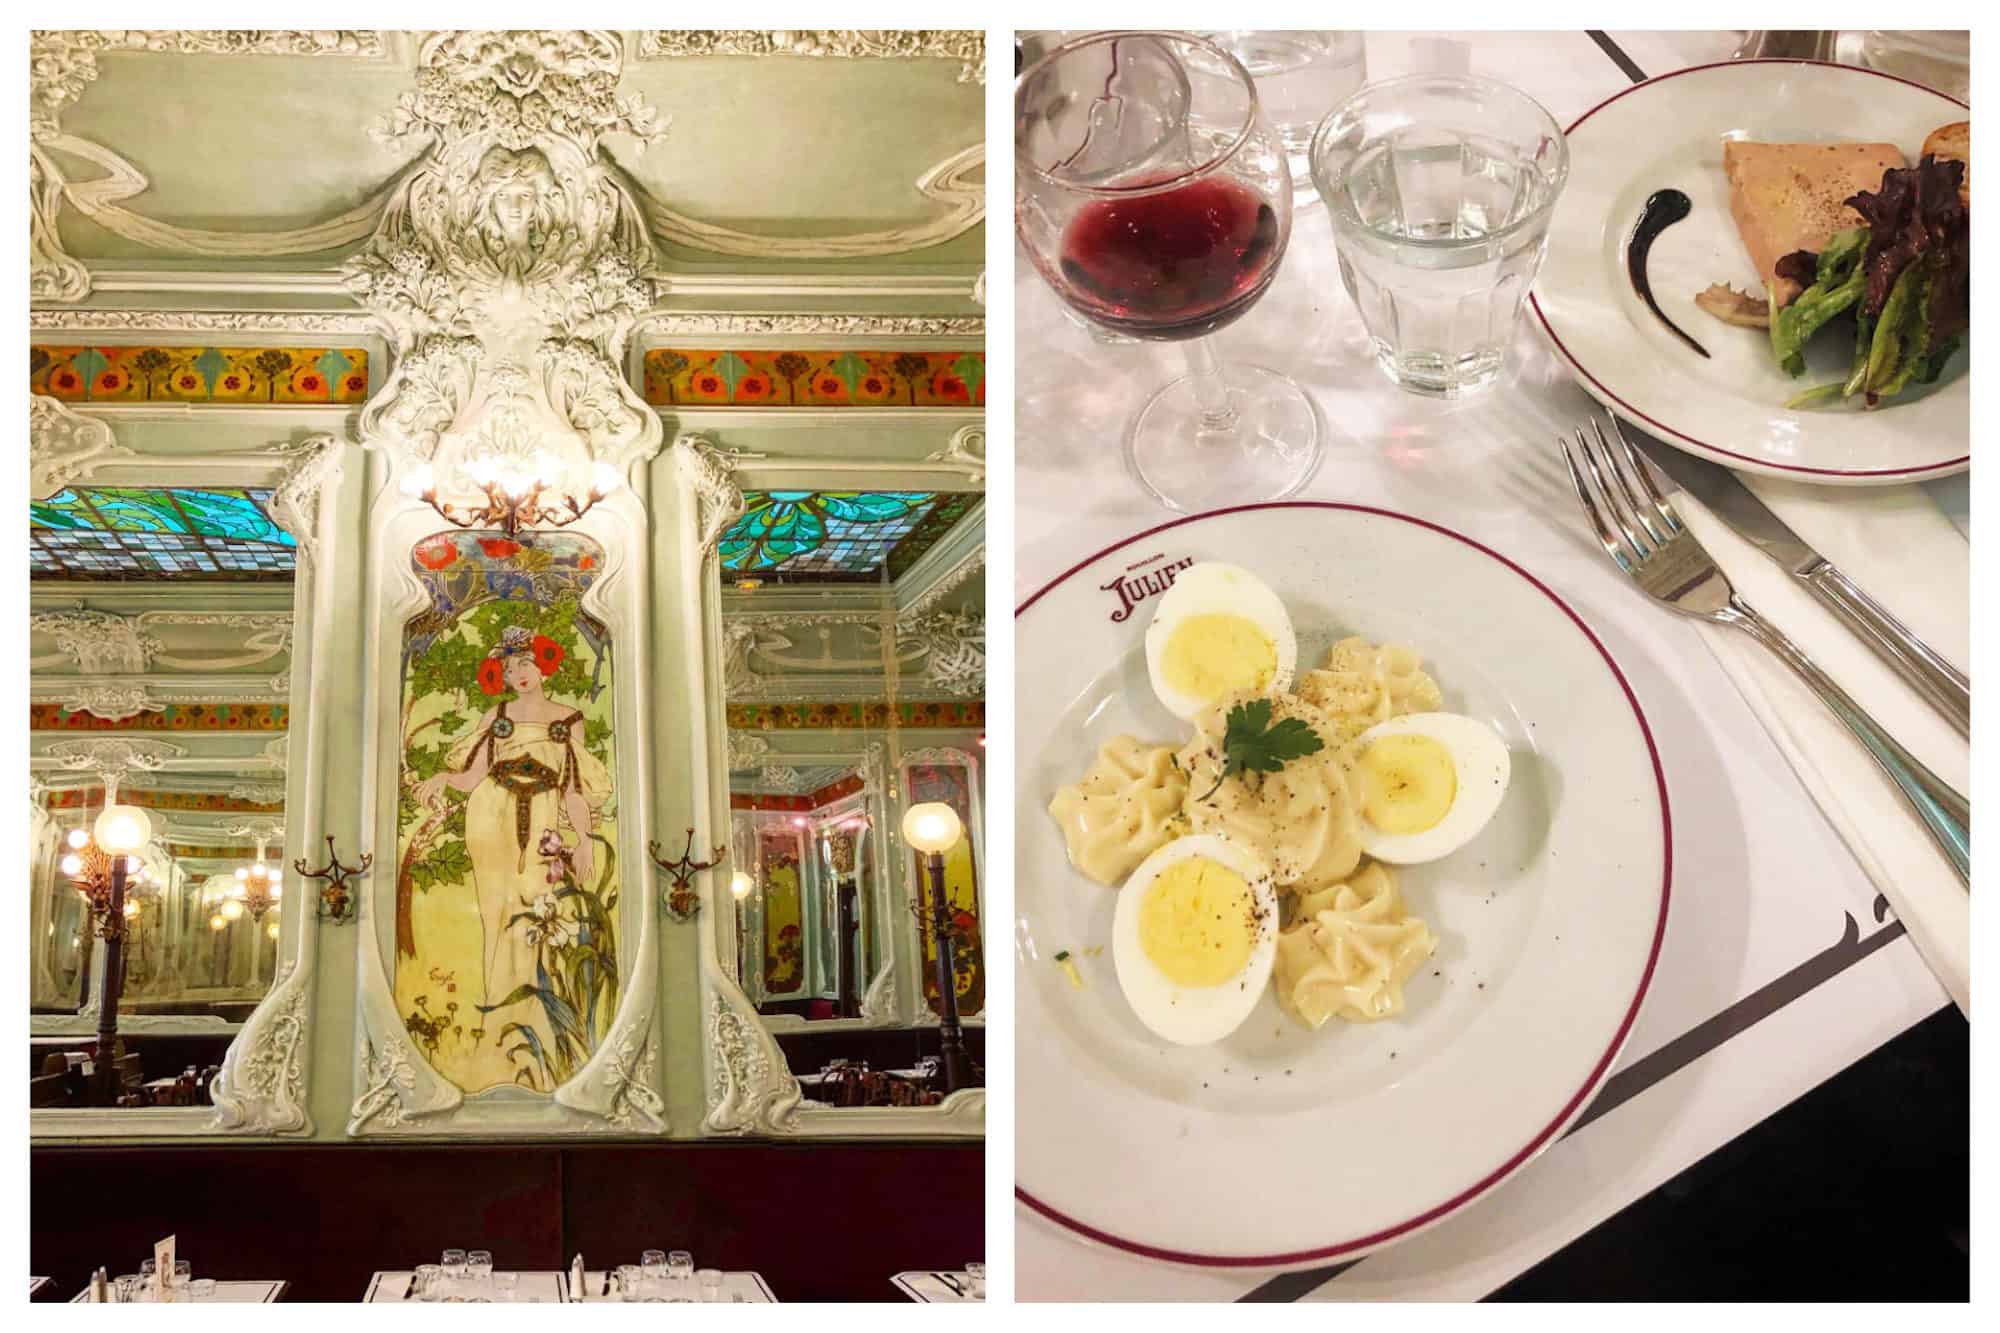 Elaborate Art Nouveau frescoes line the walls (left) and typical French classics like egg mayonnaise and foie gras are served (right) at Bouillon Julien restaurant in Paris